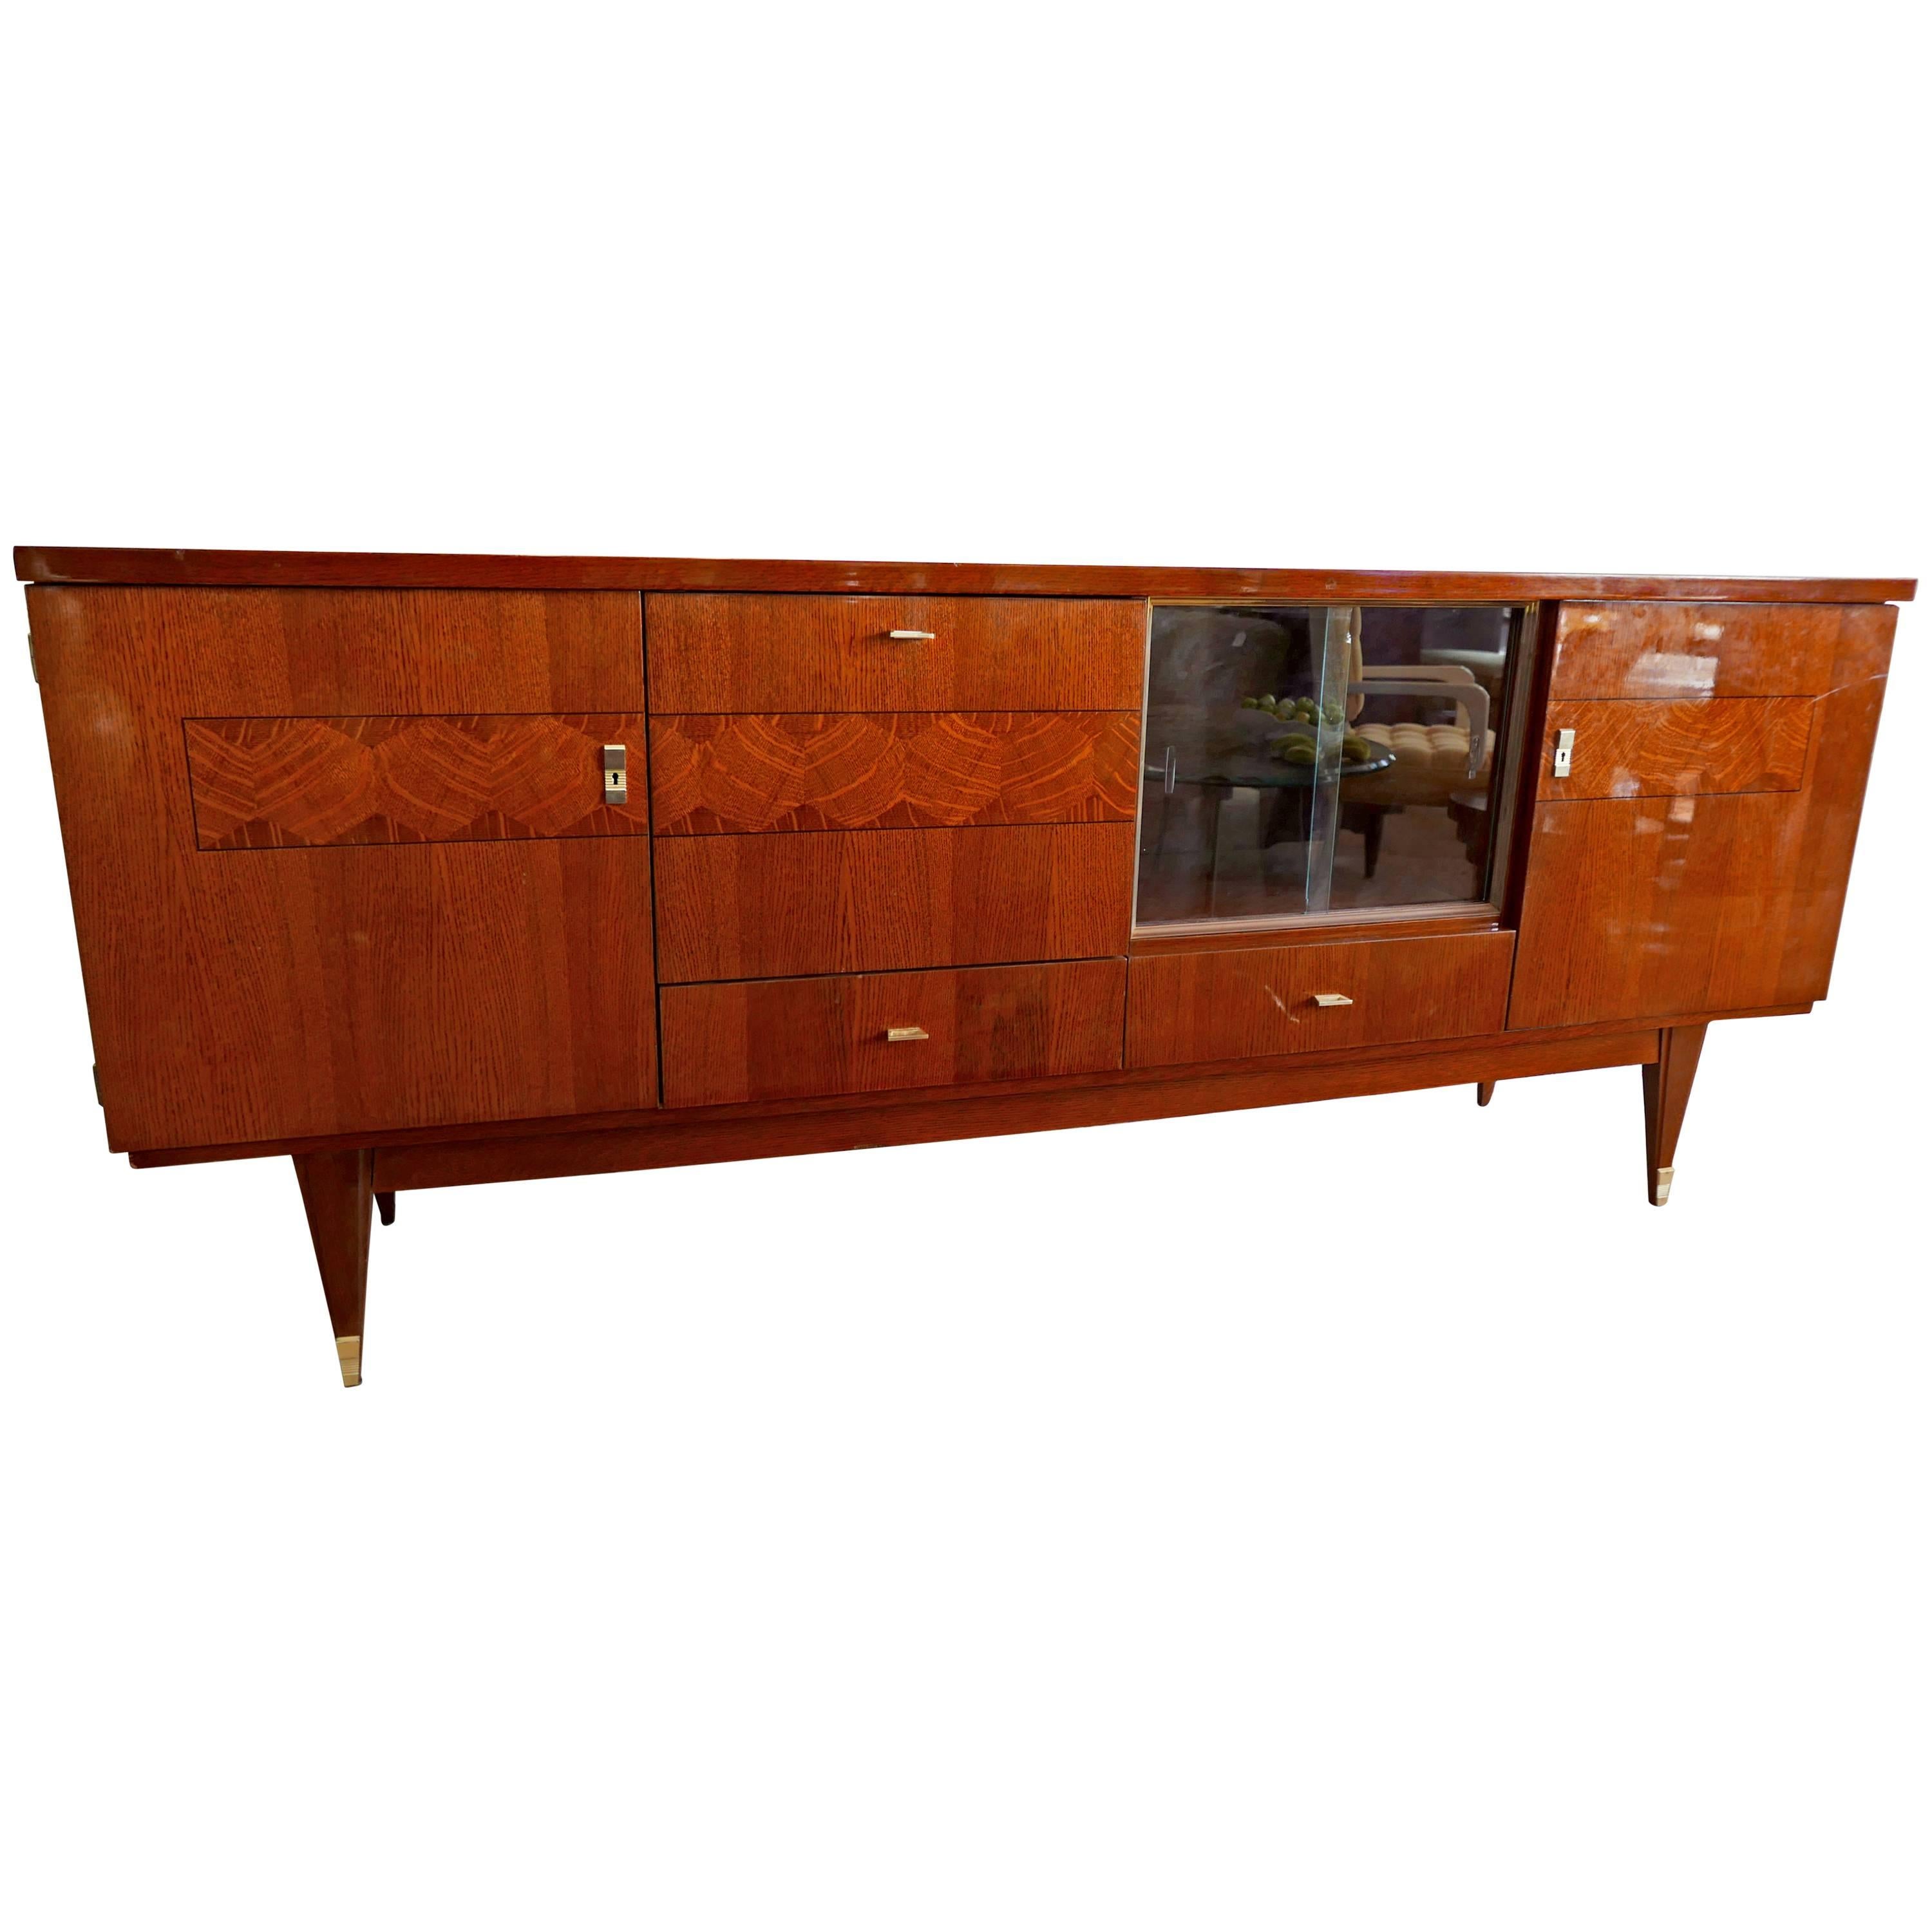 Credenza/Bar from France, 1930s Art Deco Period